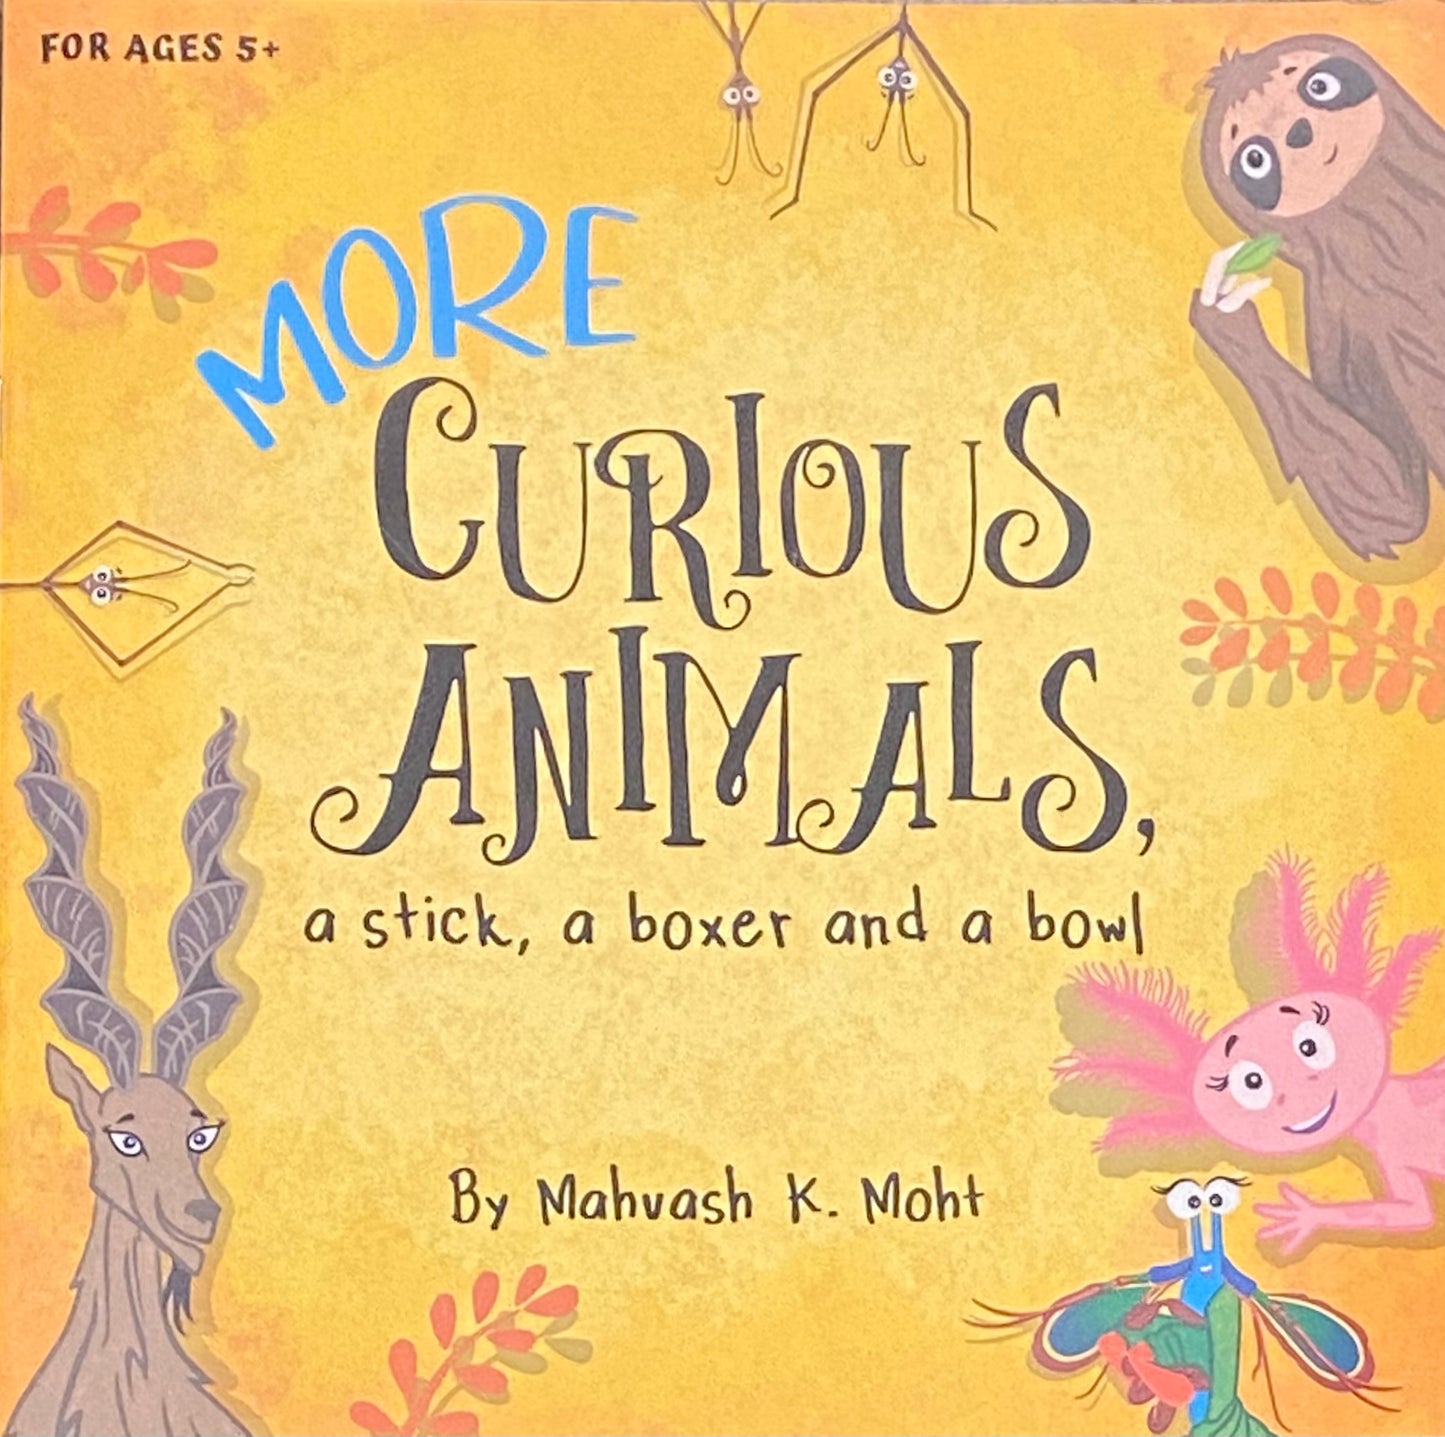 More Curious Animals: a stick, a box and a bowl by Mahvash K Moht